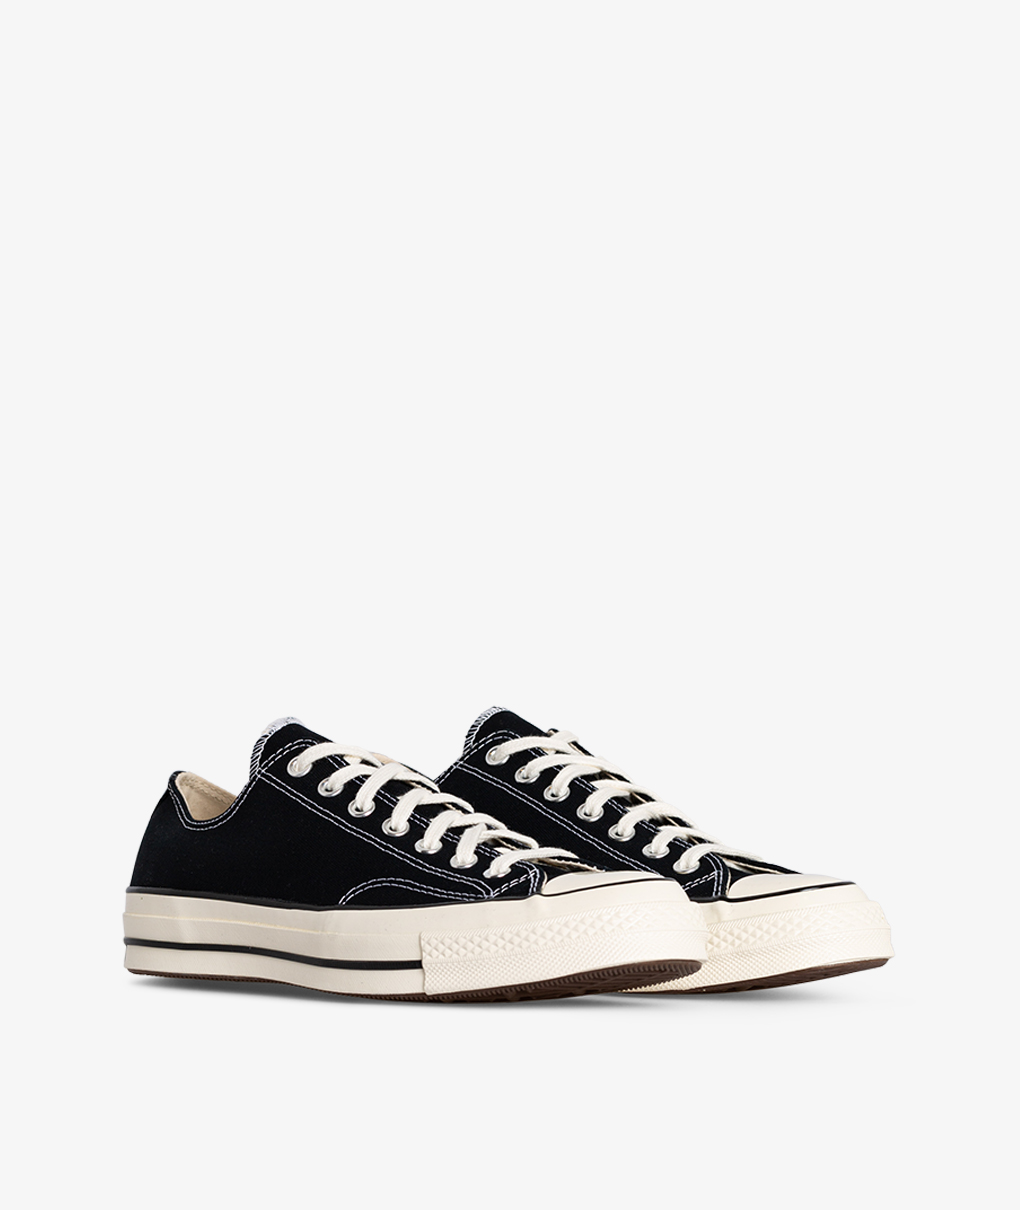 Norse Store | Shipping Worldwide - Sneakers - Converse - Chuck 70 OX